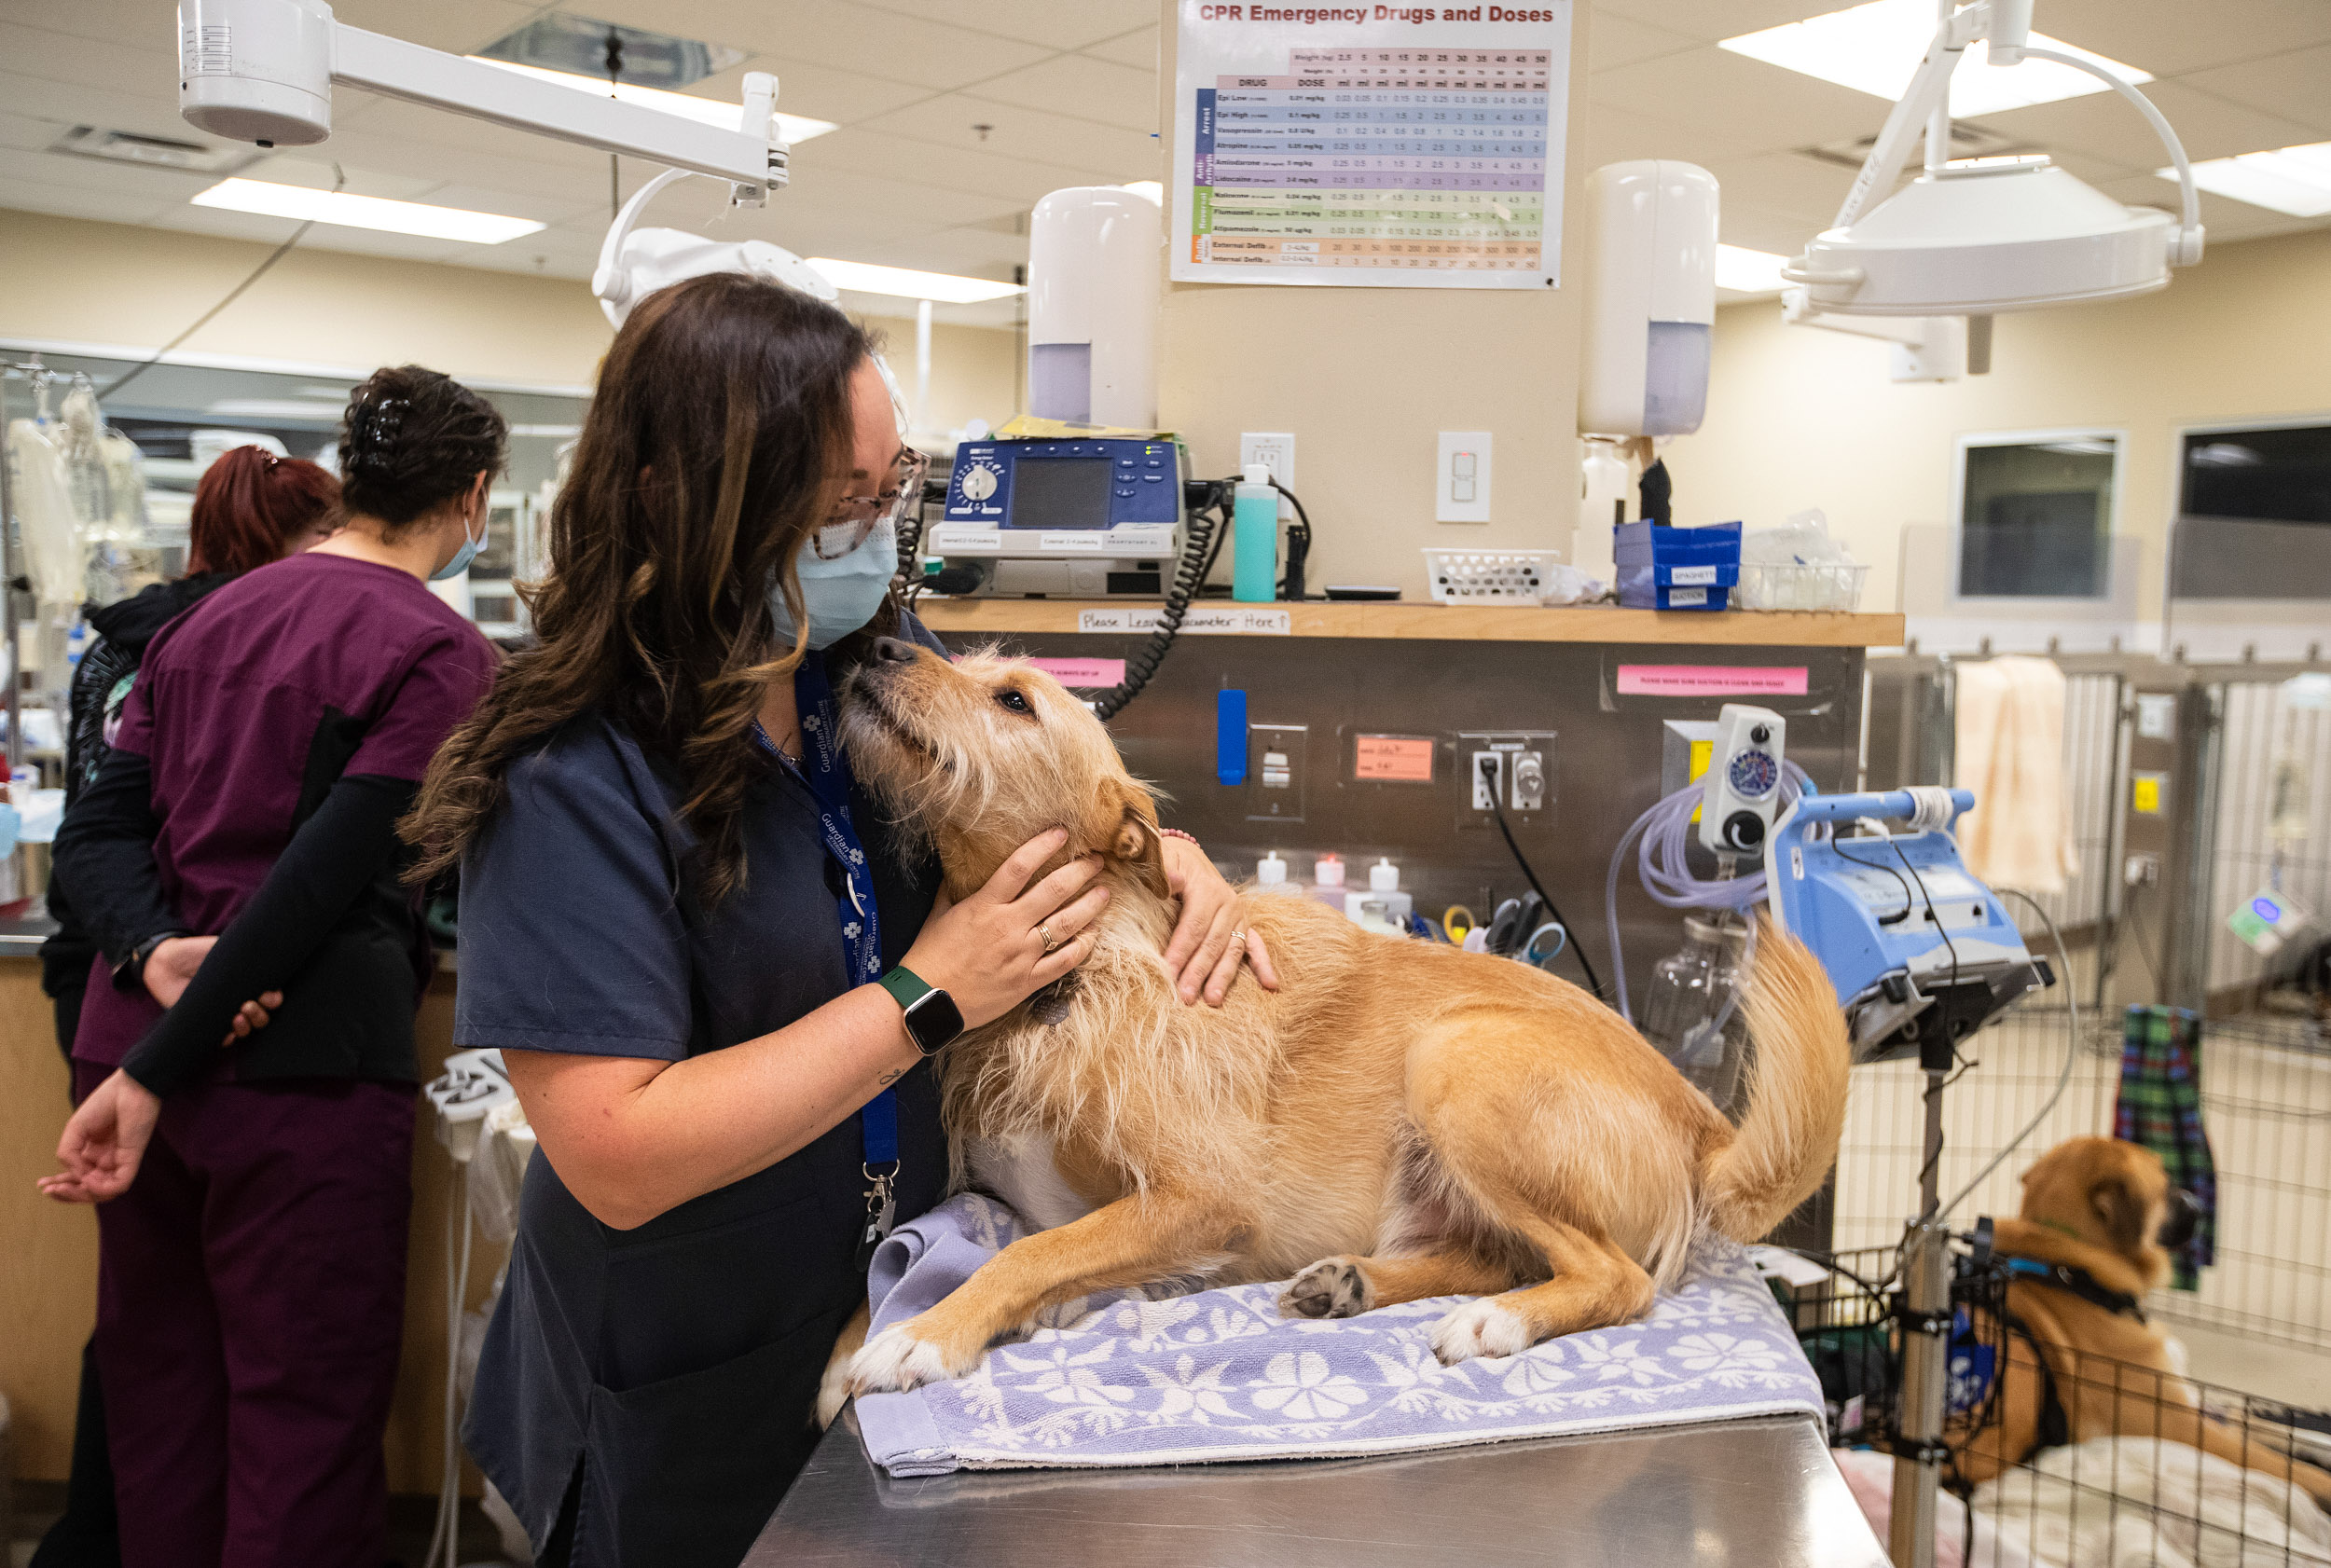 Simon at work: Demand for veterinary services skyrocketed during the pandemic, but supply is flat (Photo by Jason Franson)